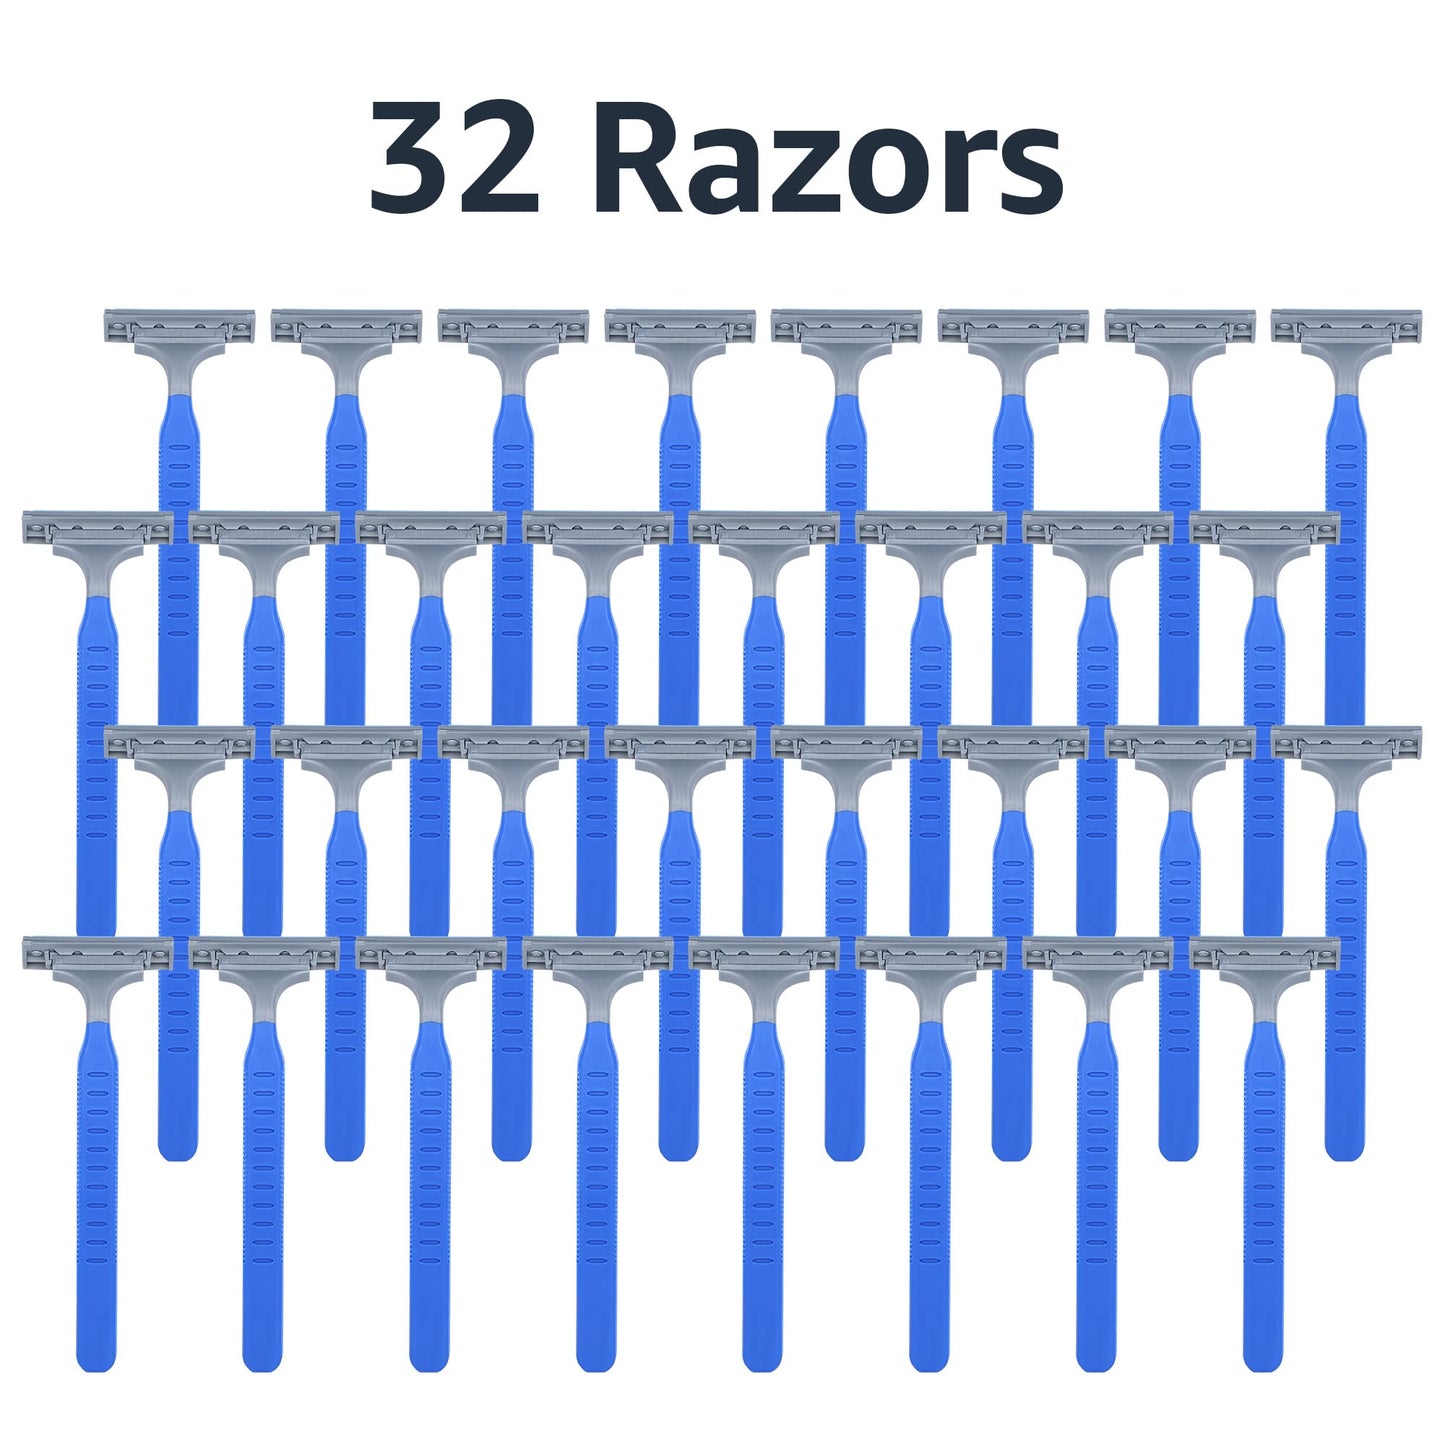 Amazon Basics Twin Blade Pivoting Disposable Razors with Rubber Grip, 32 Count, 1-Pack (Previously Solimo)